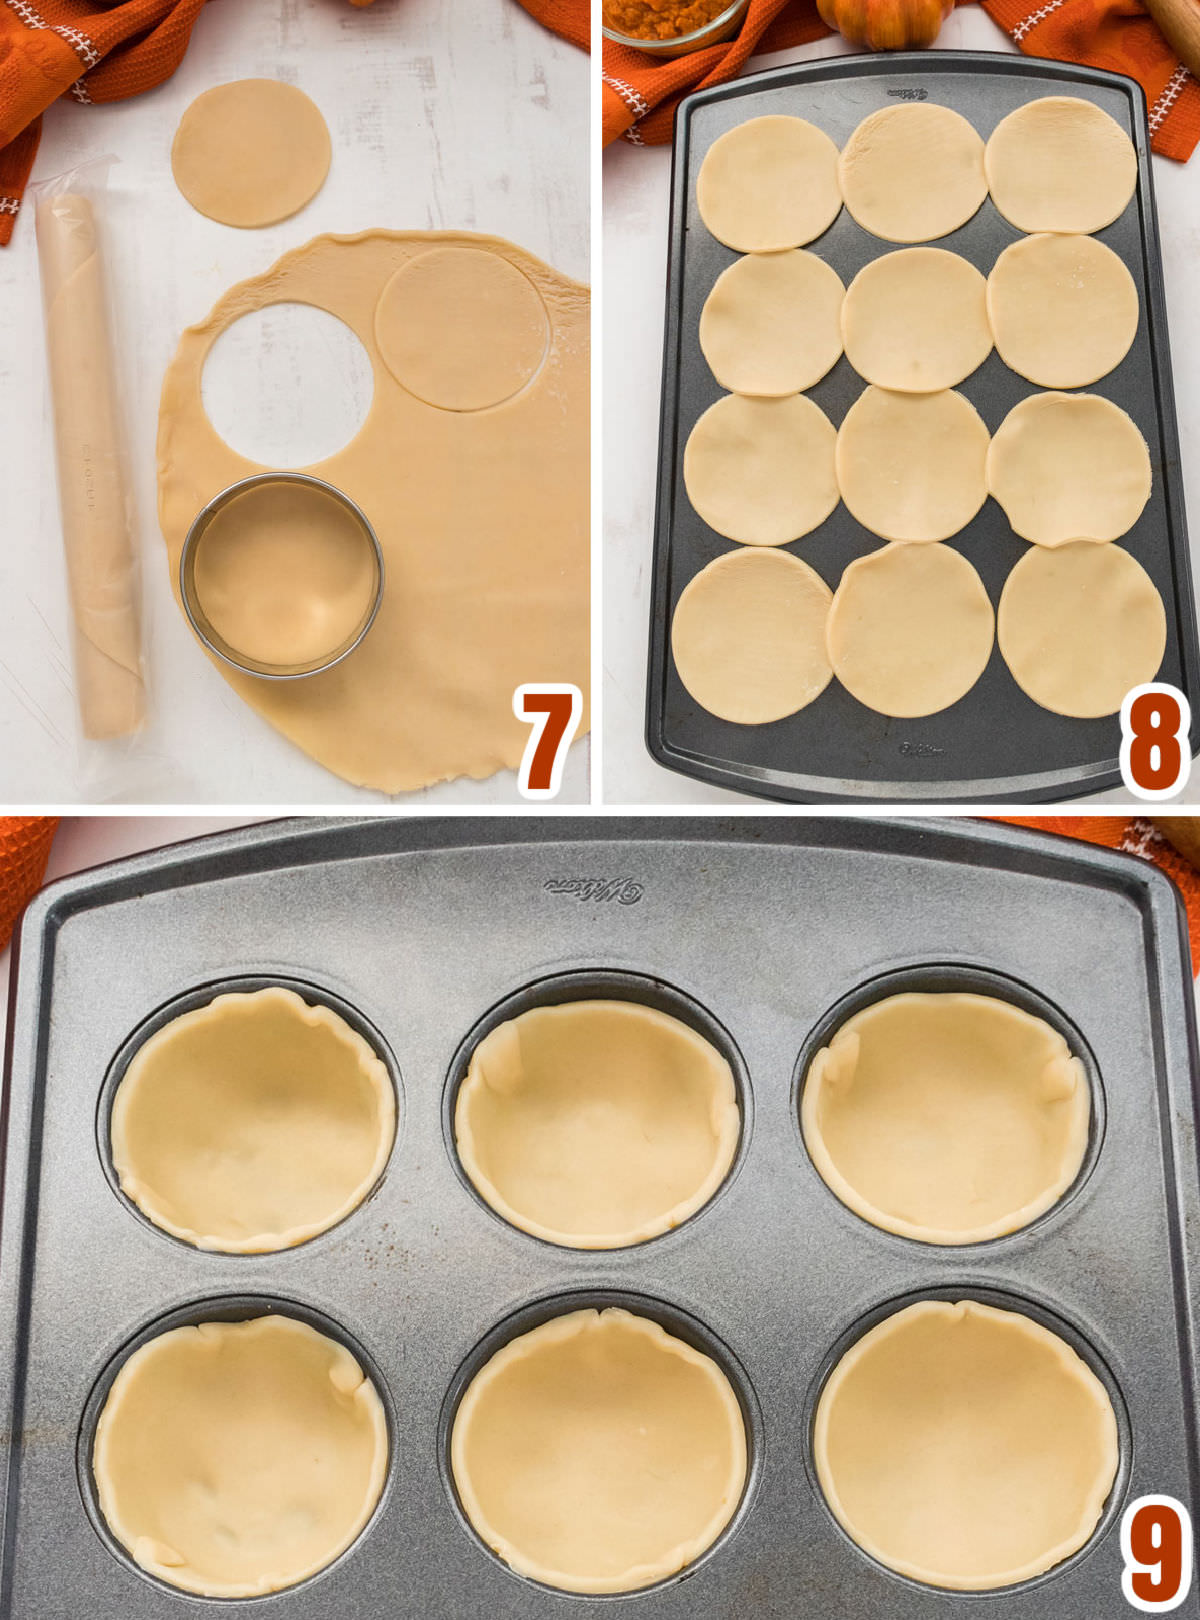 Collage image showing the steps for preparing the Pie Crust in the muffin tins.